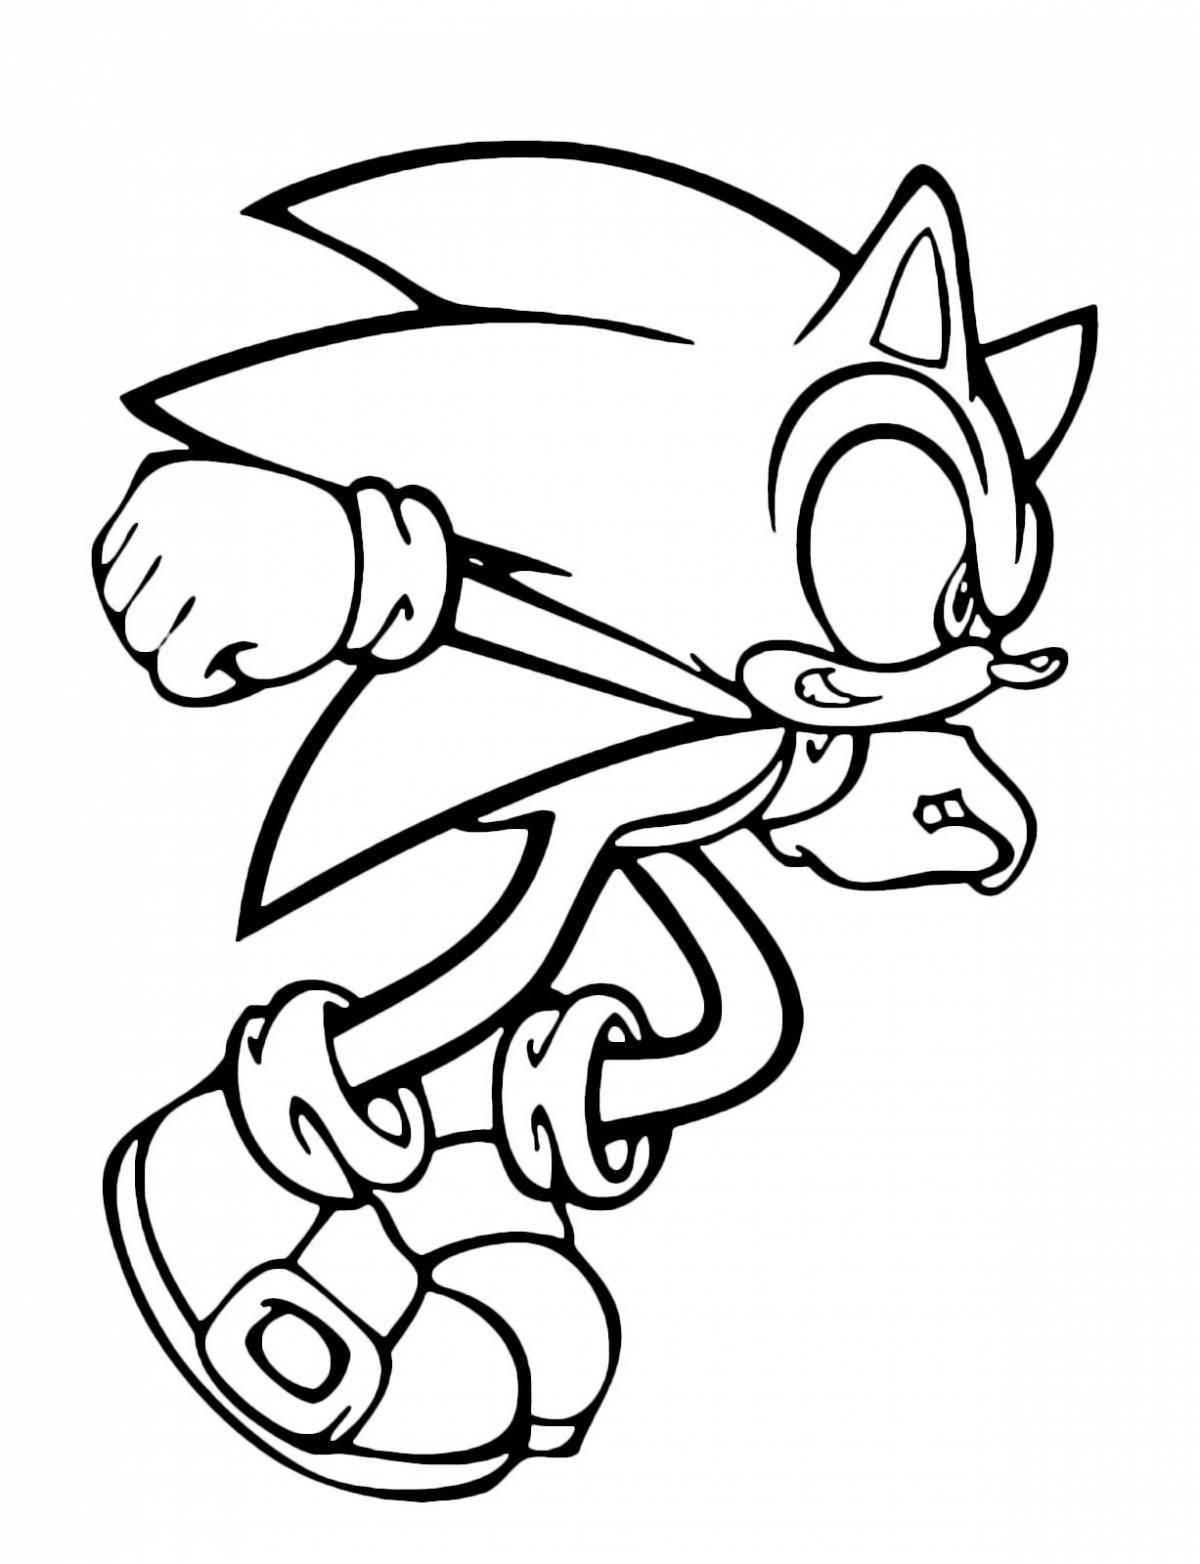 Sonic glowing excalibur coloring page